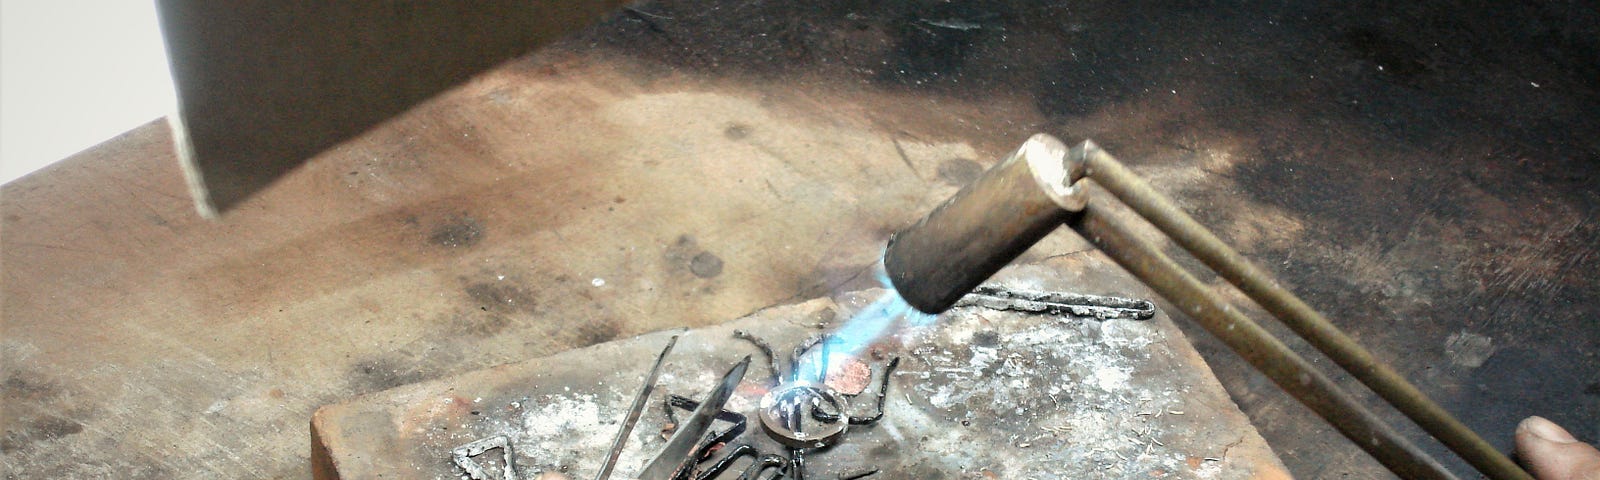 A close up image of a soldering block where a jeweler is in the process of torch-soldering a ring.